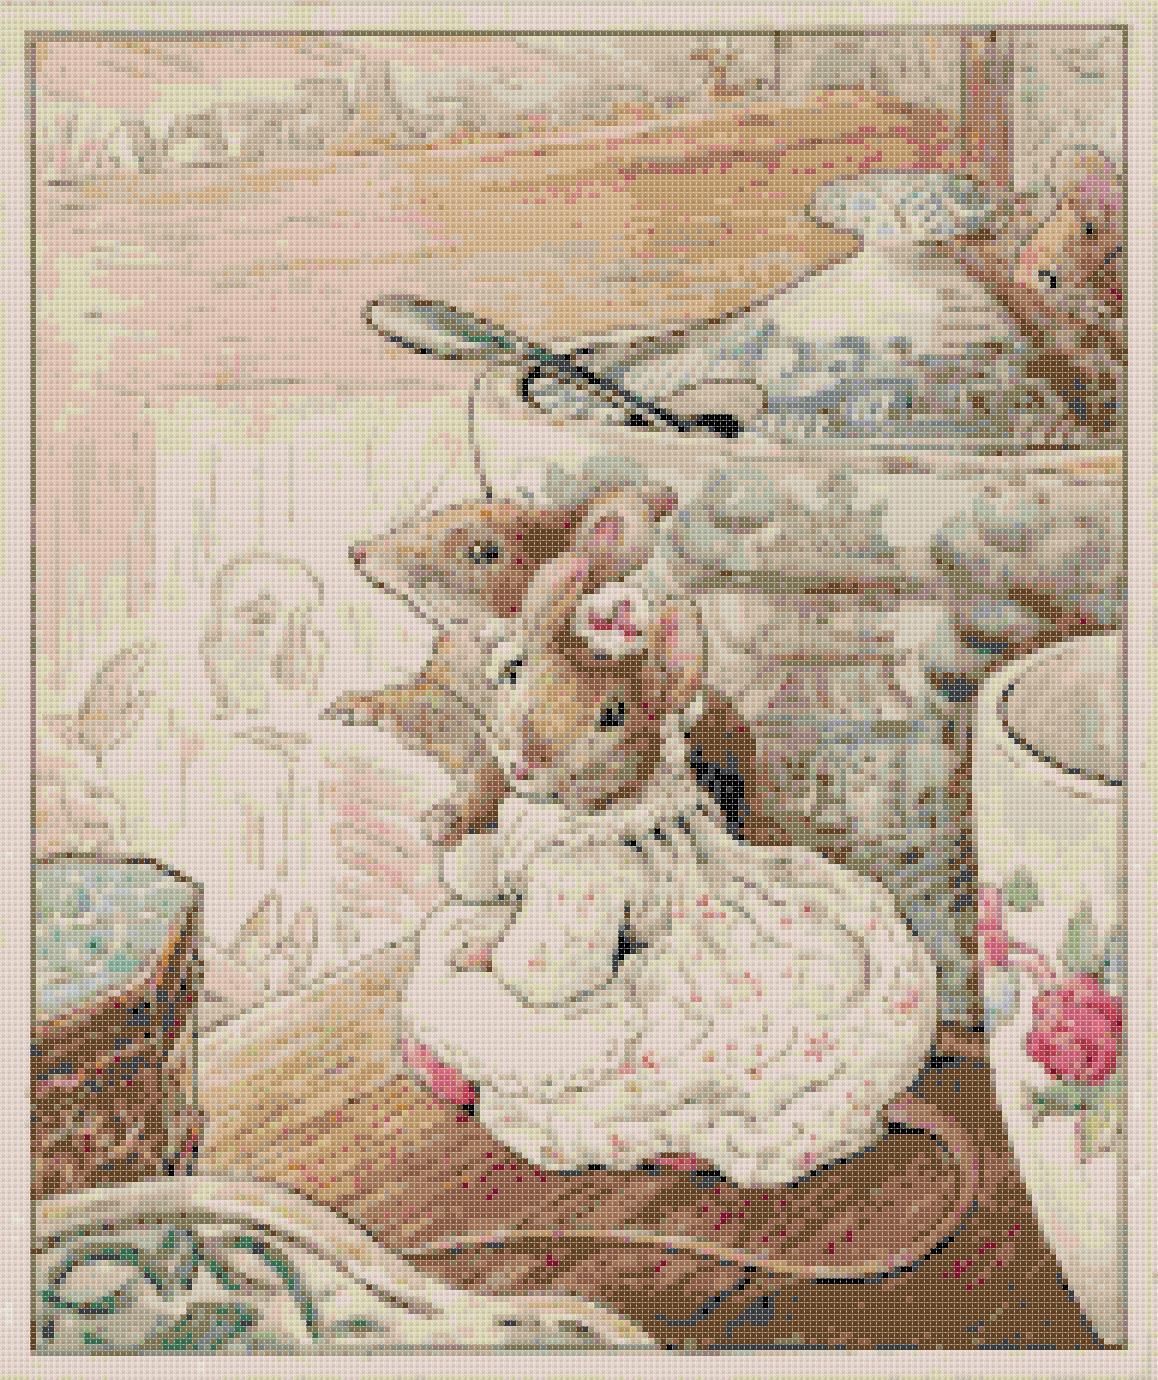 Primary image for Counted Cross Stitch  B. potter's two mice married 13.79" x 16.43"  L1143